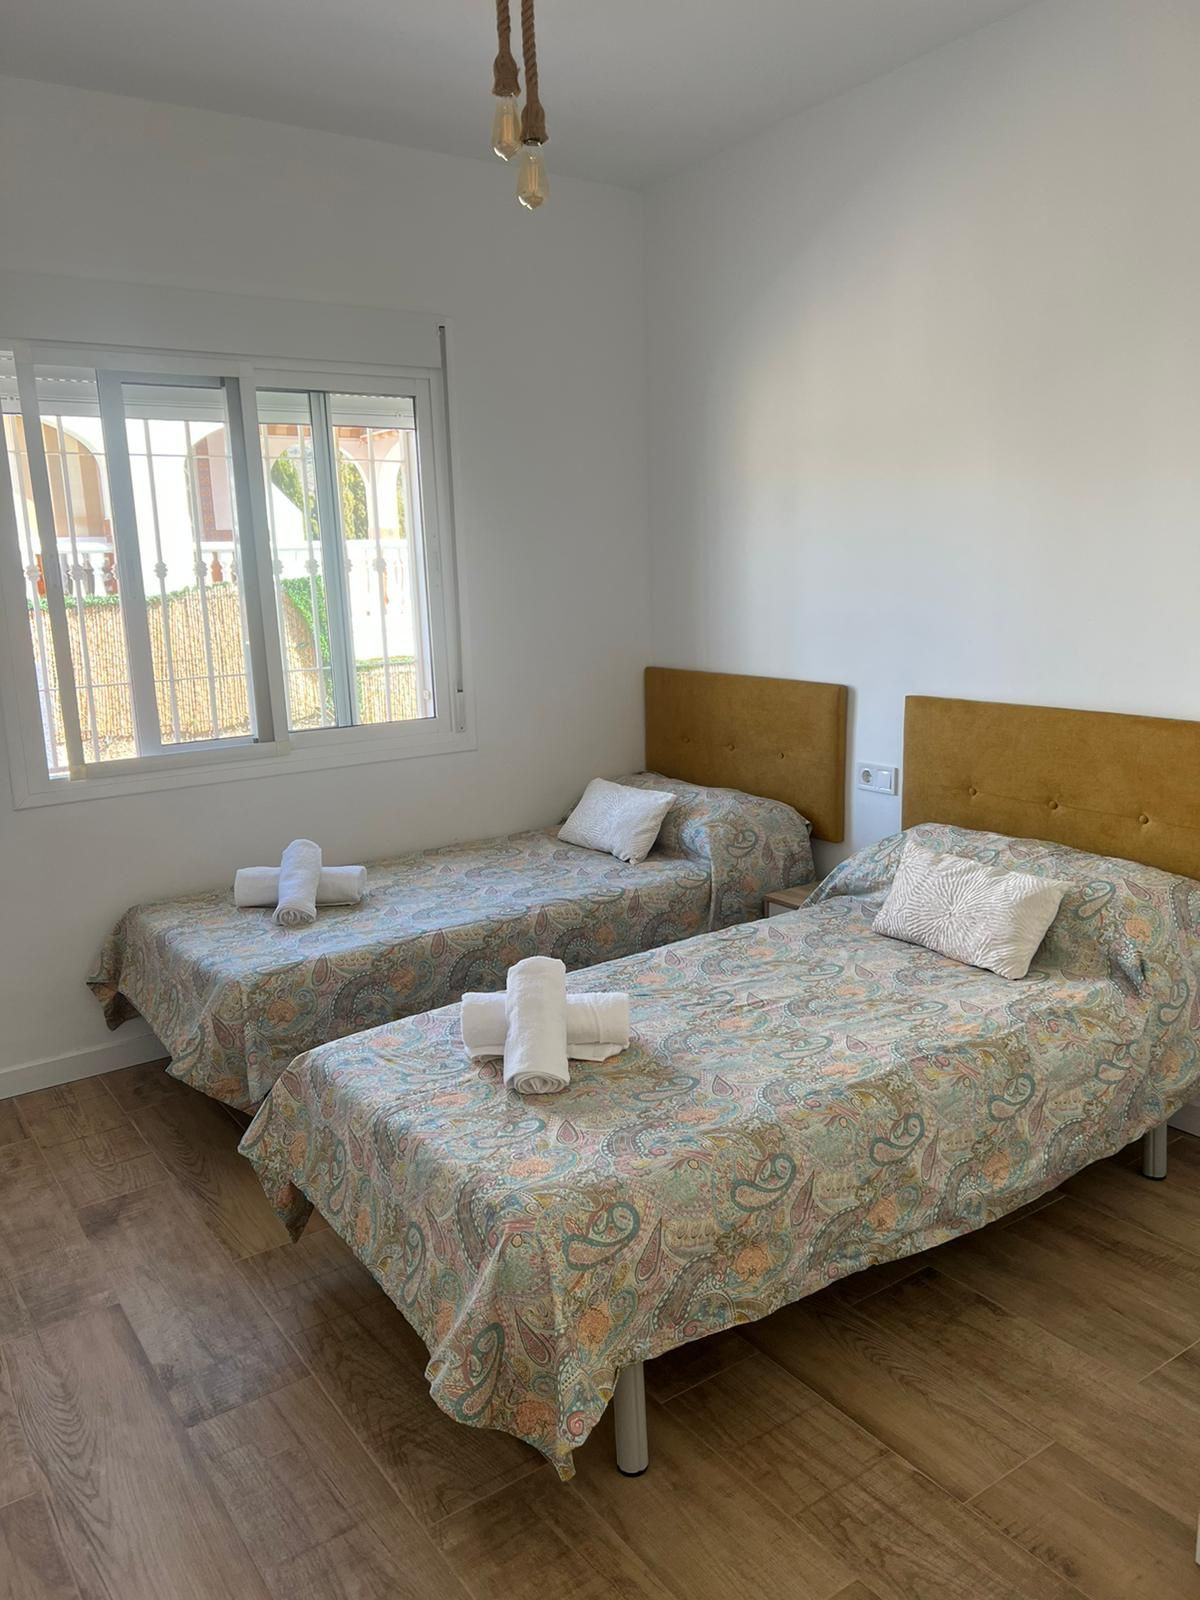 Located in the Exotica area on the outskirts of Nerja is this private and recently refurbished 3 bedroom detached villa with possibility to add a s...